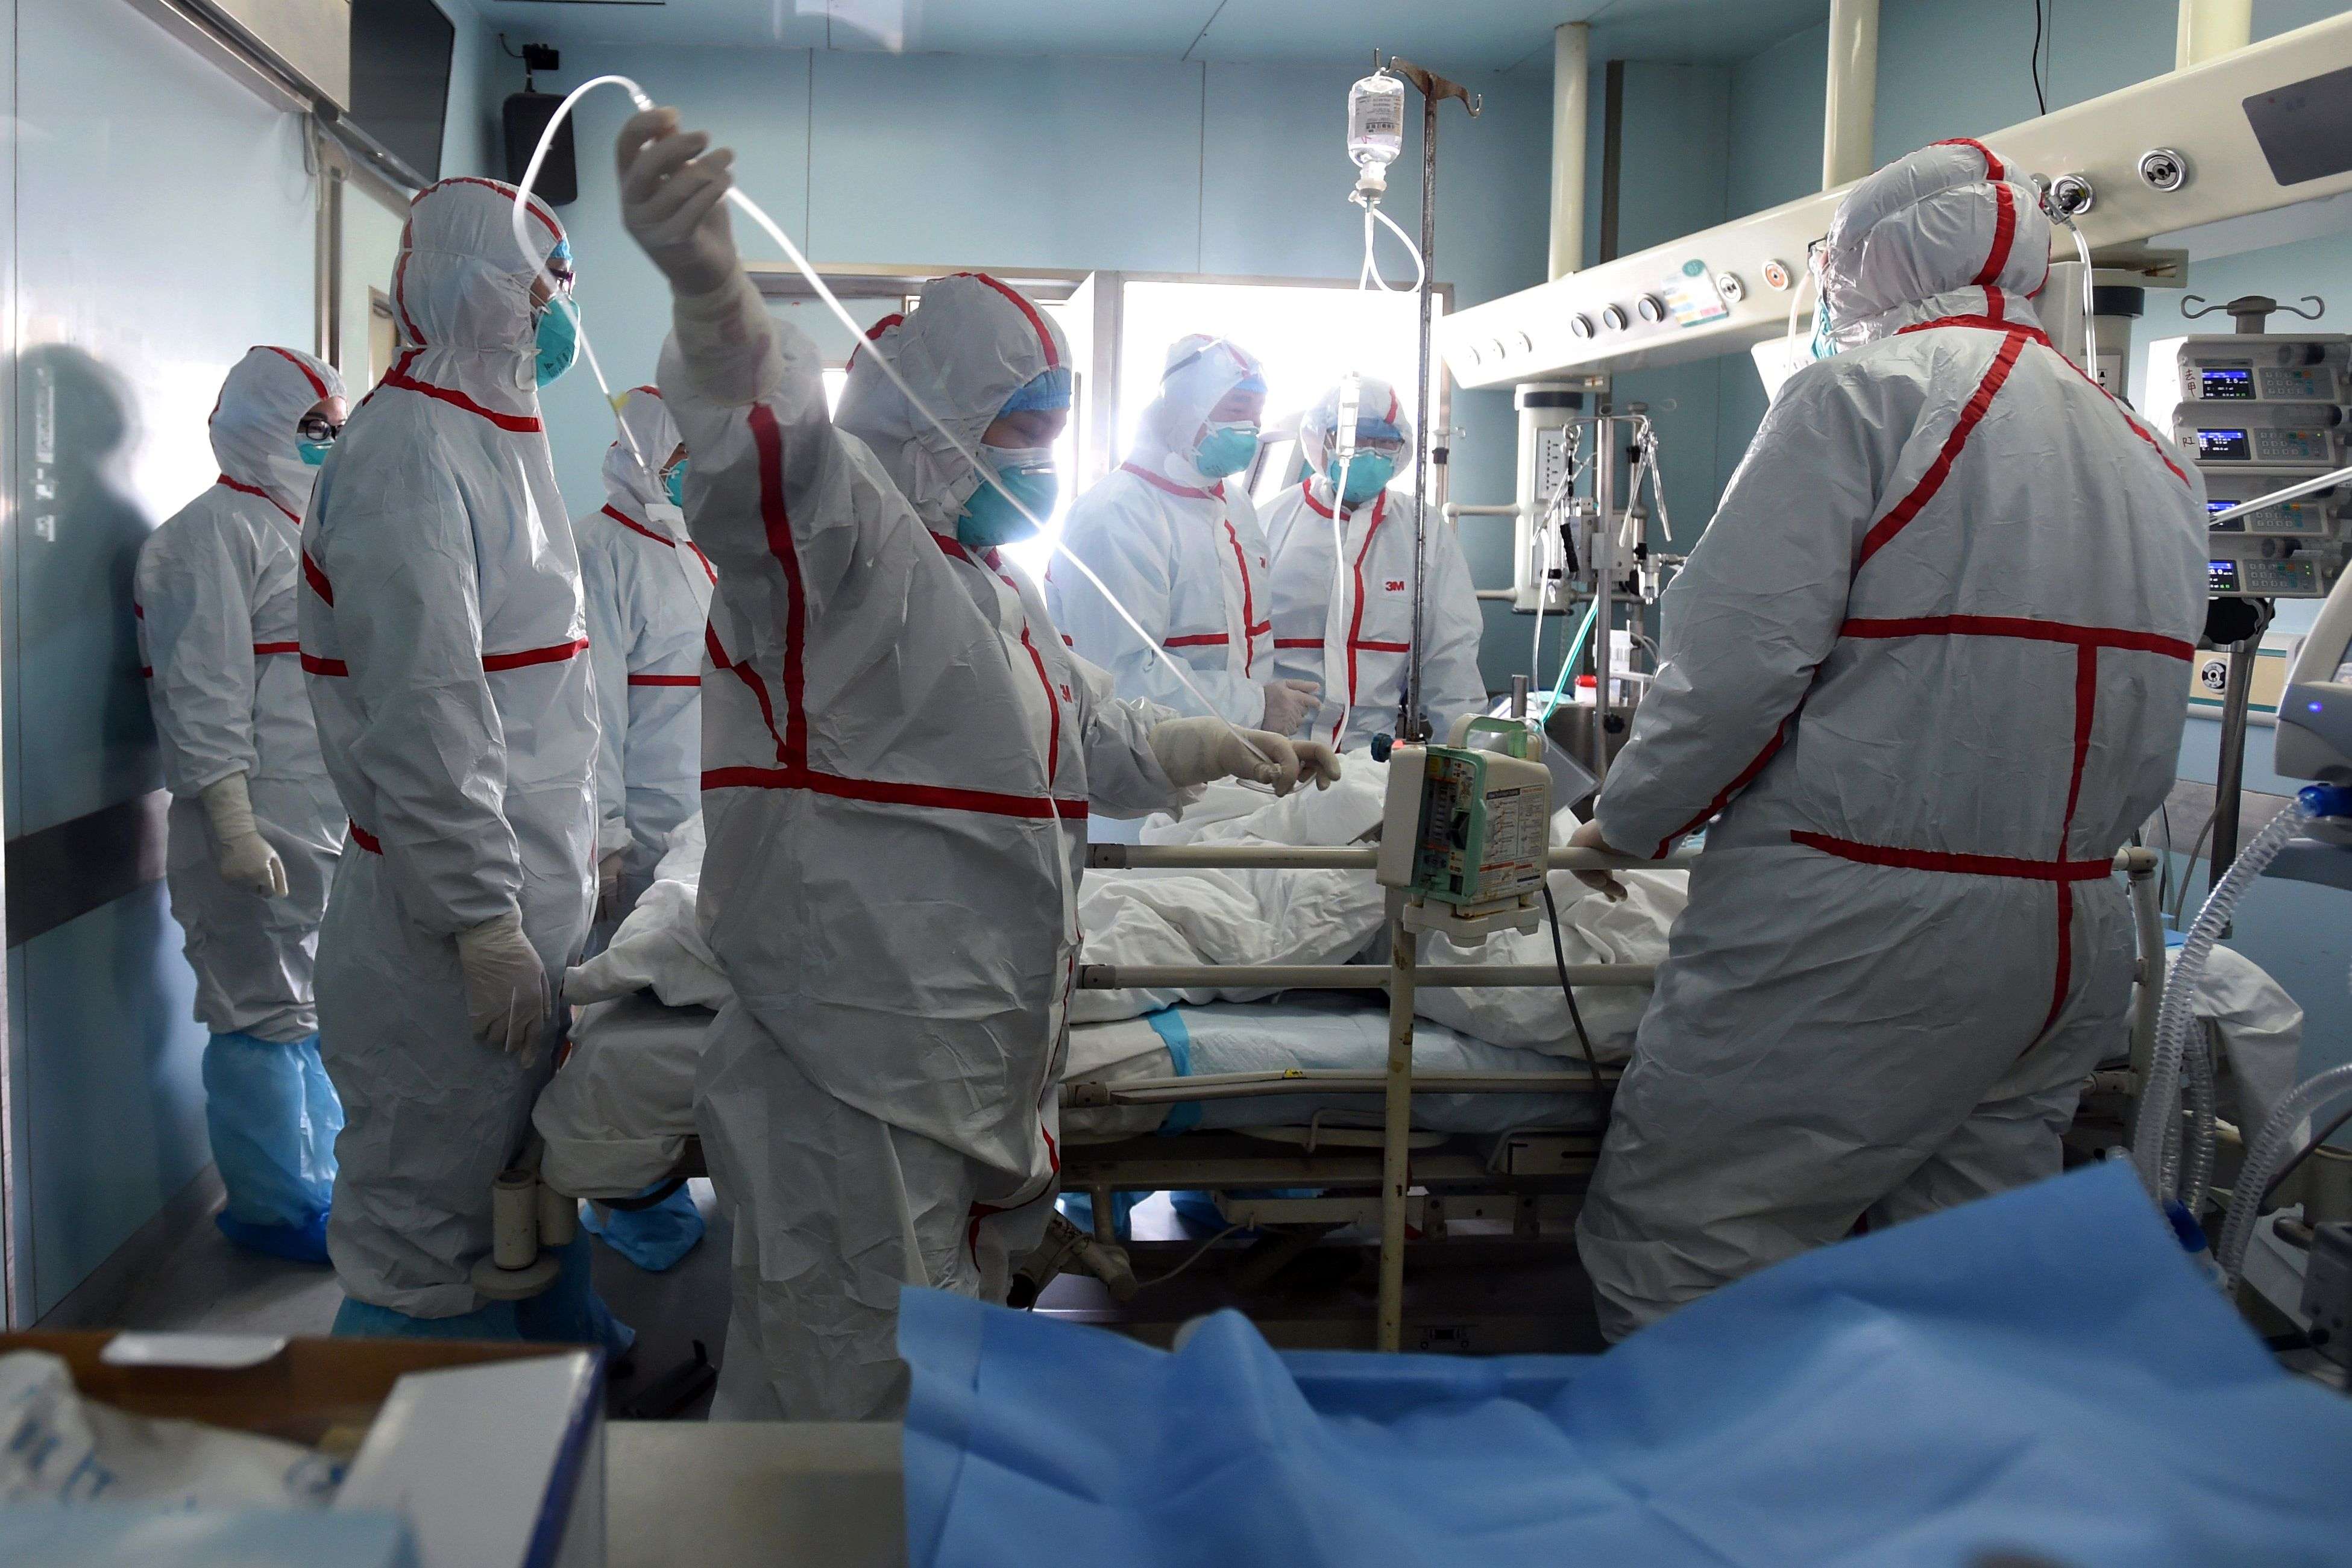 An H7N9 bird flu patient is treated in a hospital in Wuhan, Hubei province. A mutation of the strain has been found in Guangdong province. Photo: AFP